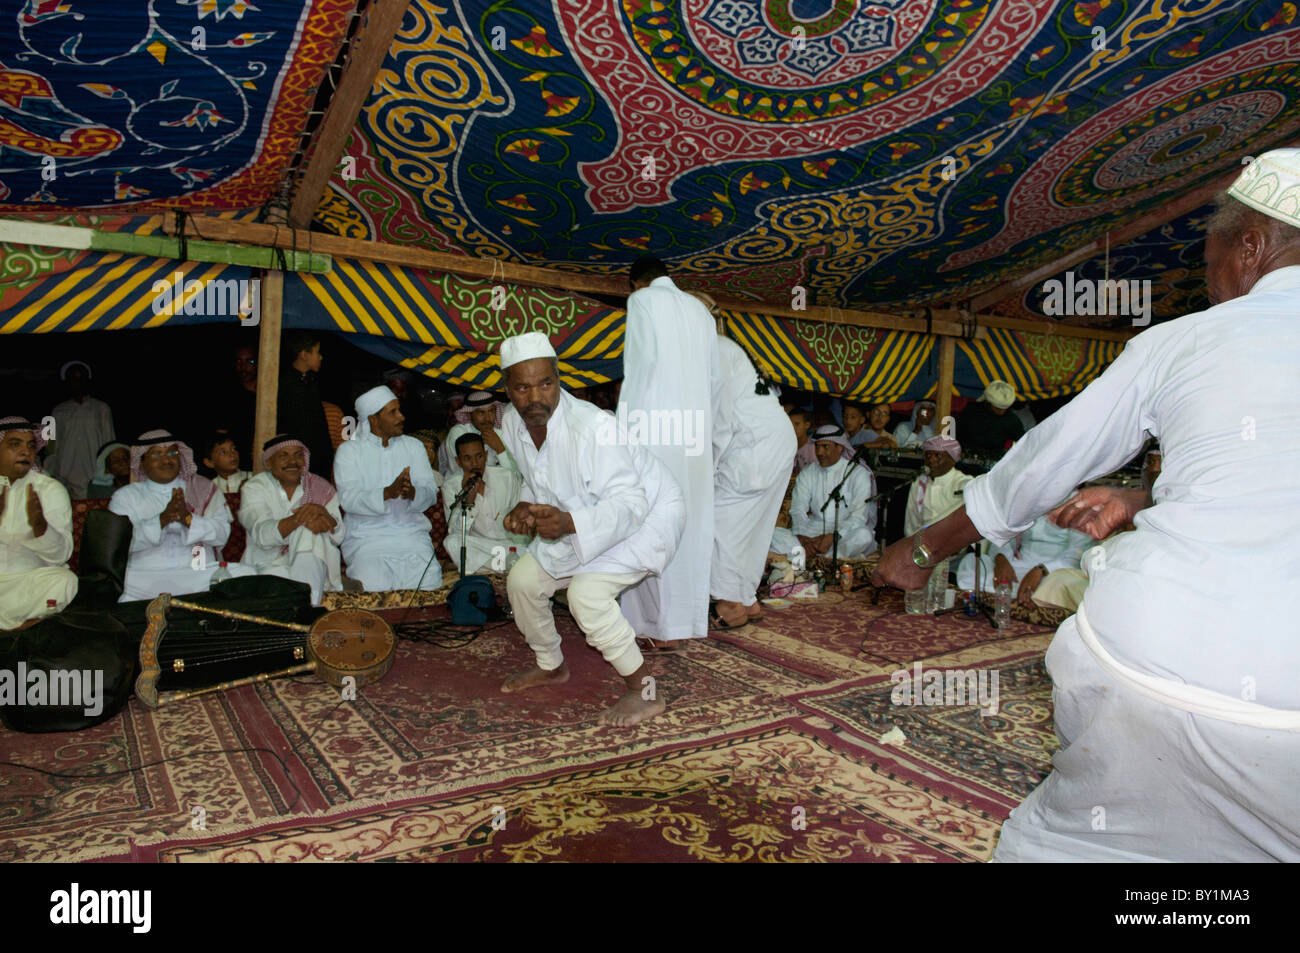 Guests celebrate with dance during a traditional Bedouin wedding celebration. El Tur, Sinai Peninsula, Egypt Stock Photo